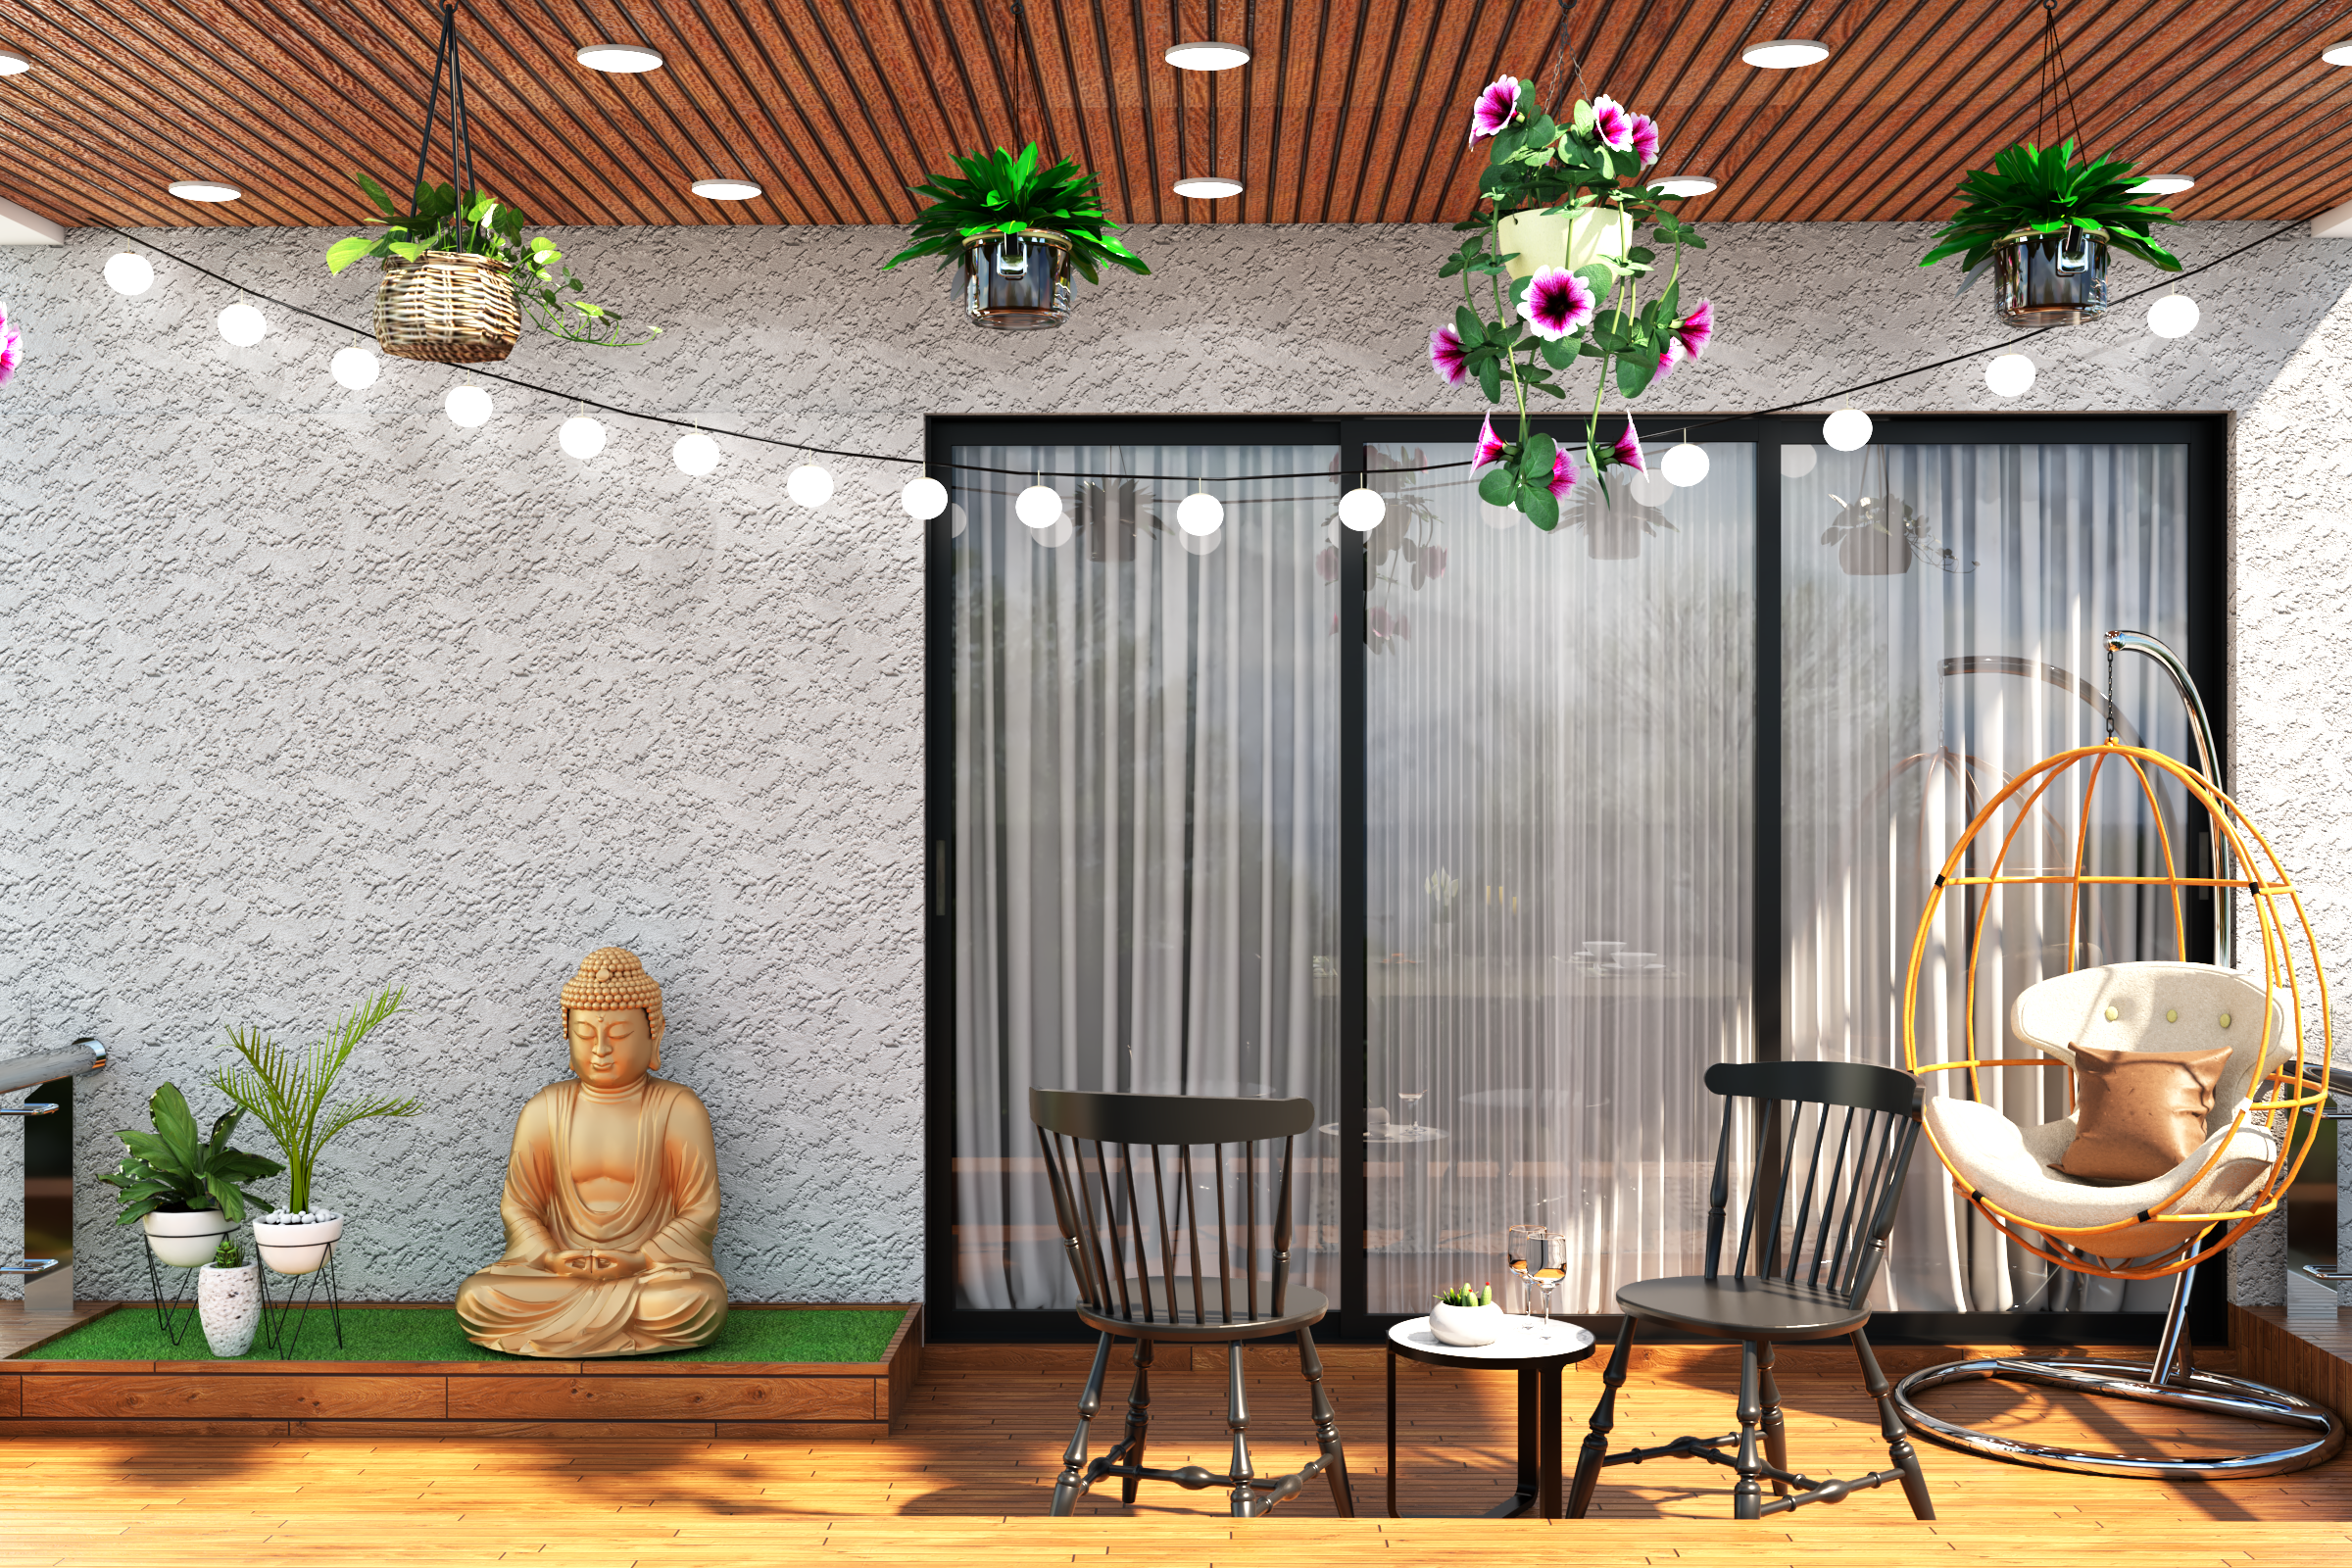 Buddha Modern Balcony Design with String Lights and Wooden Floor